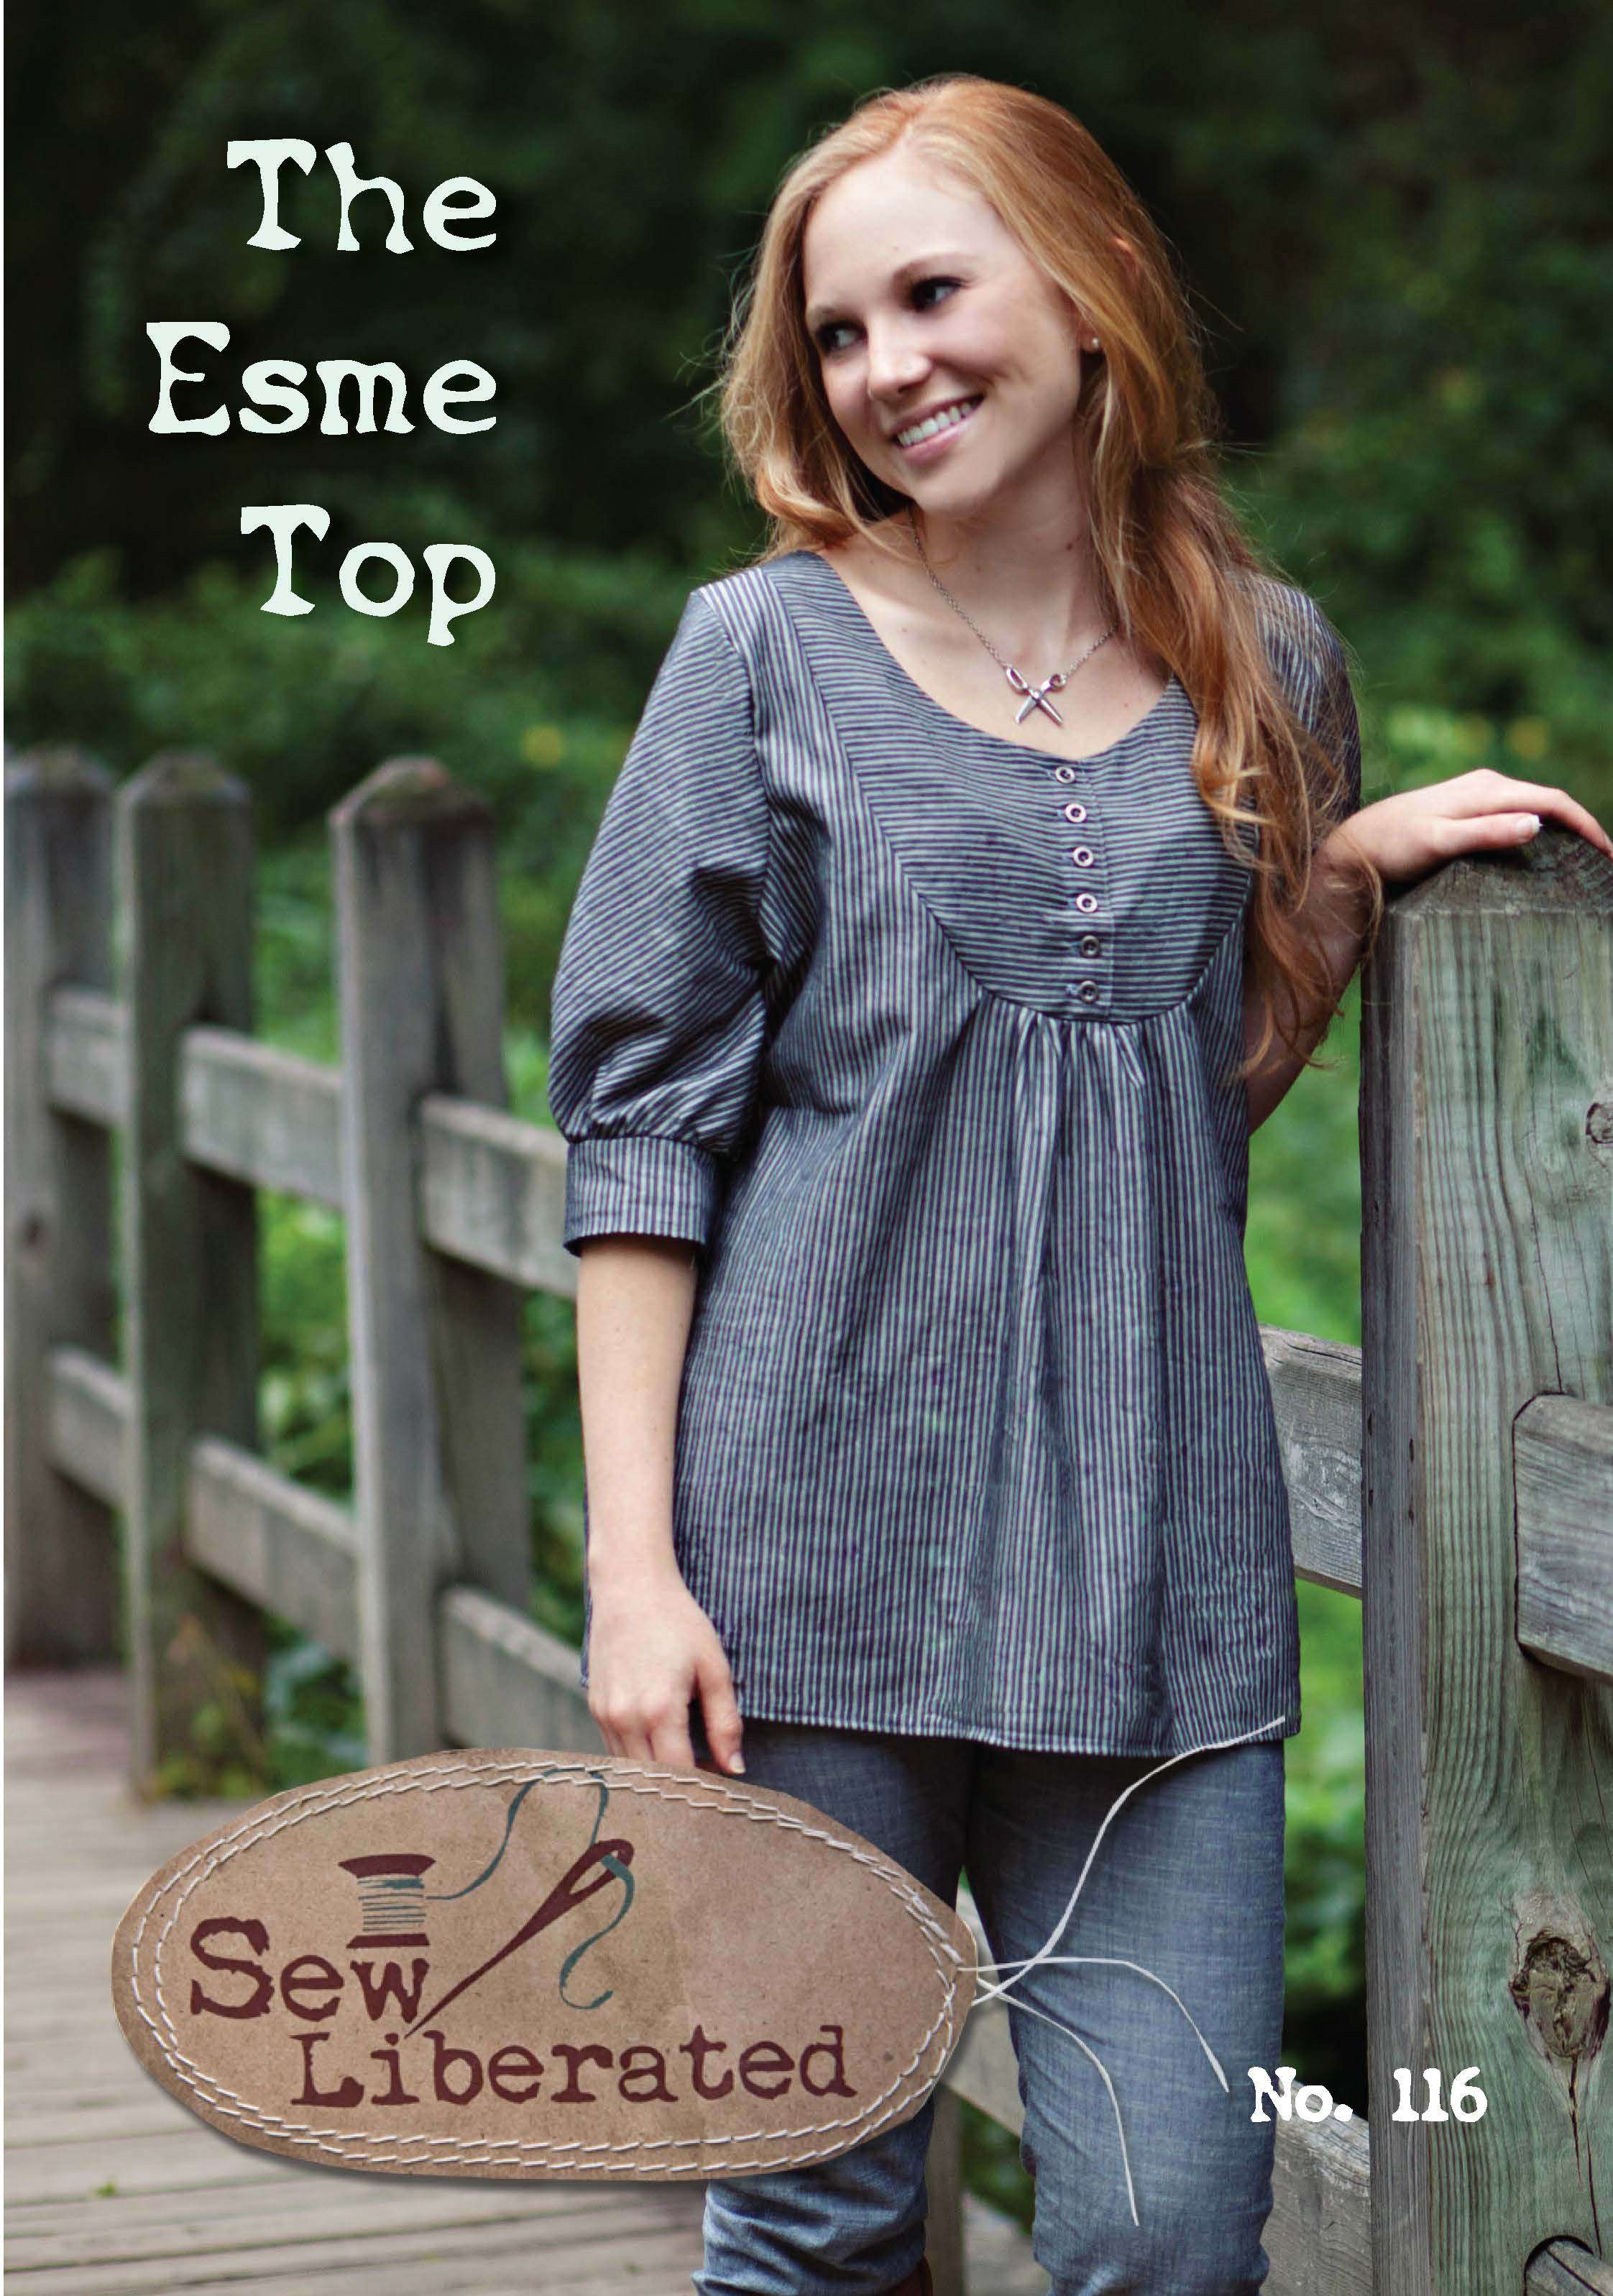 Esme Top Sewing Pattern by Sew Liberated – Keepsake Quilting